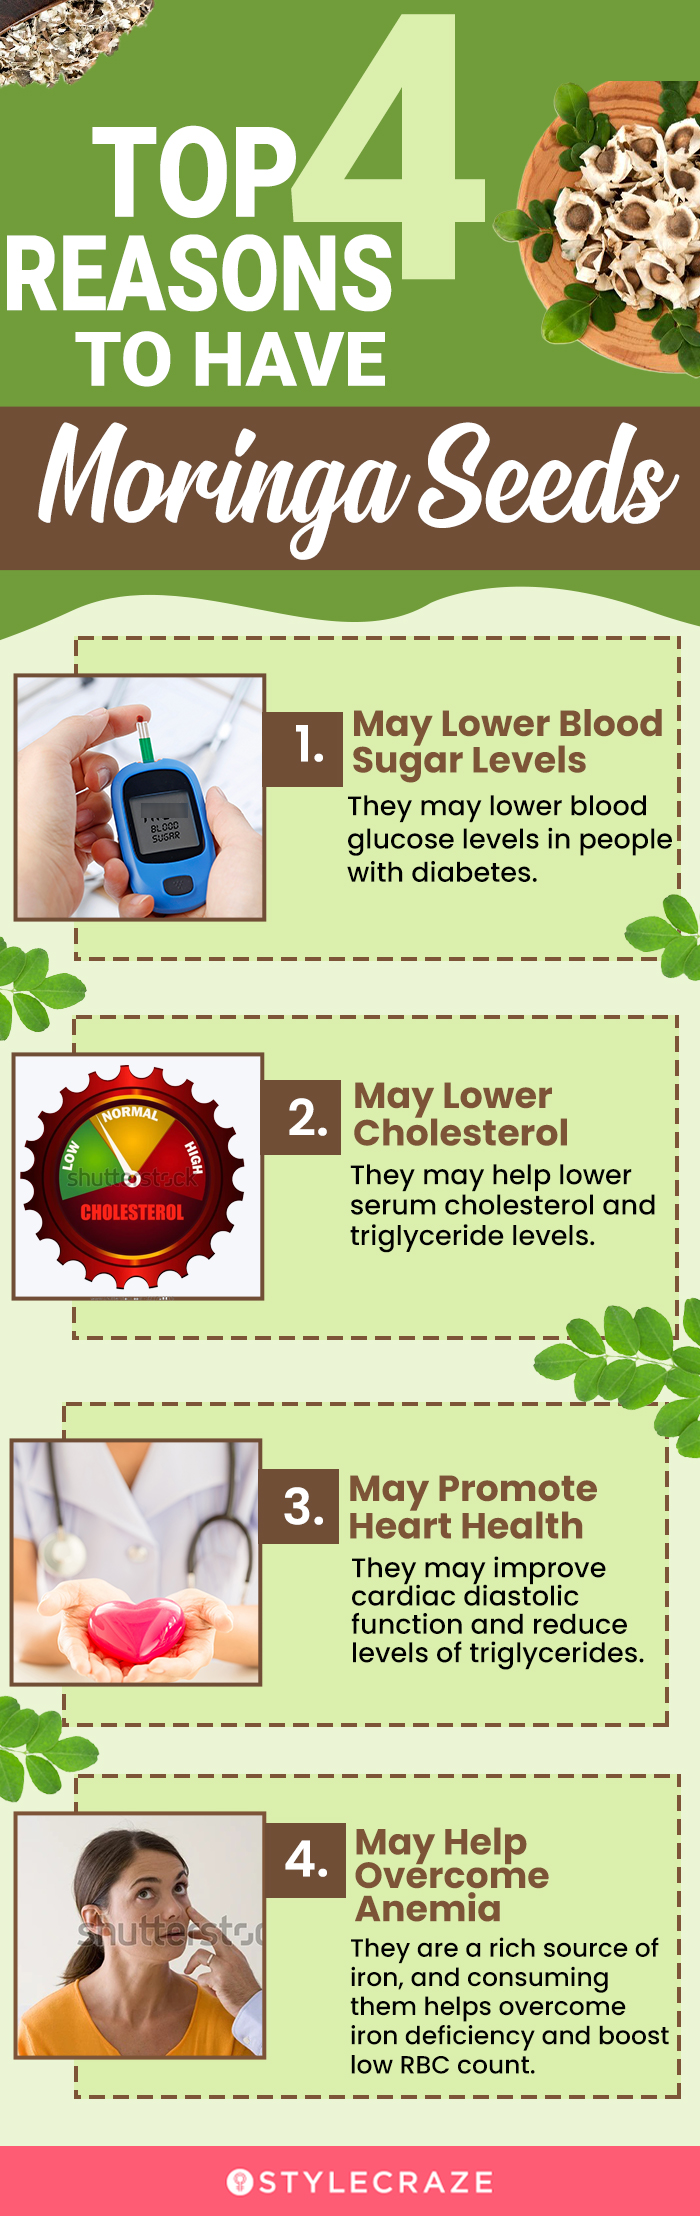 top 4 reasons to have moringa seeds [infographic]